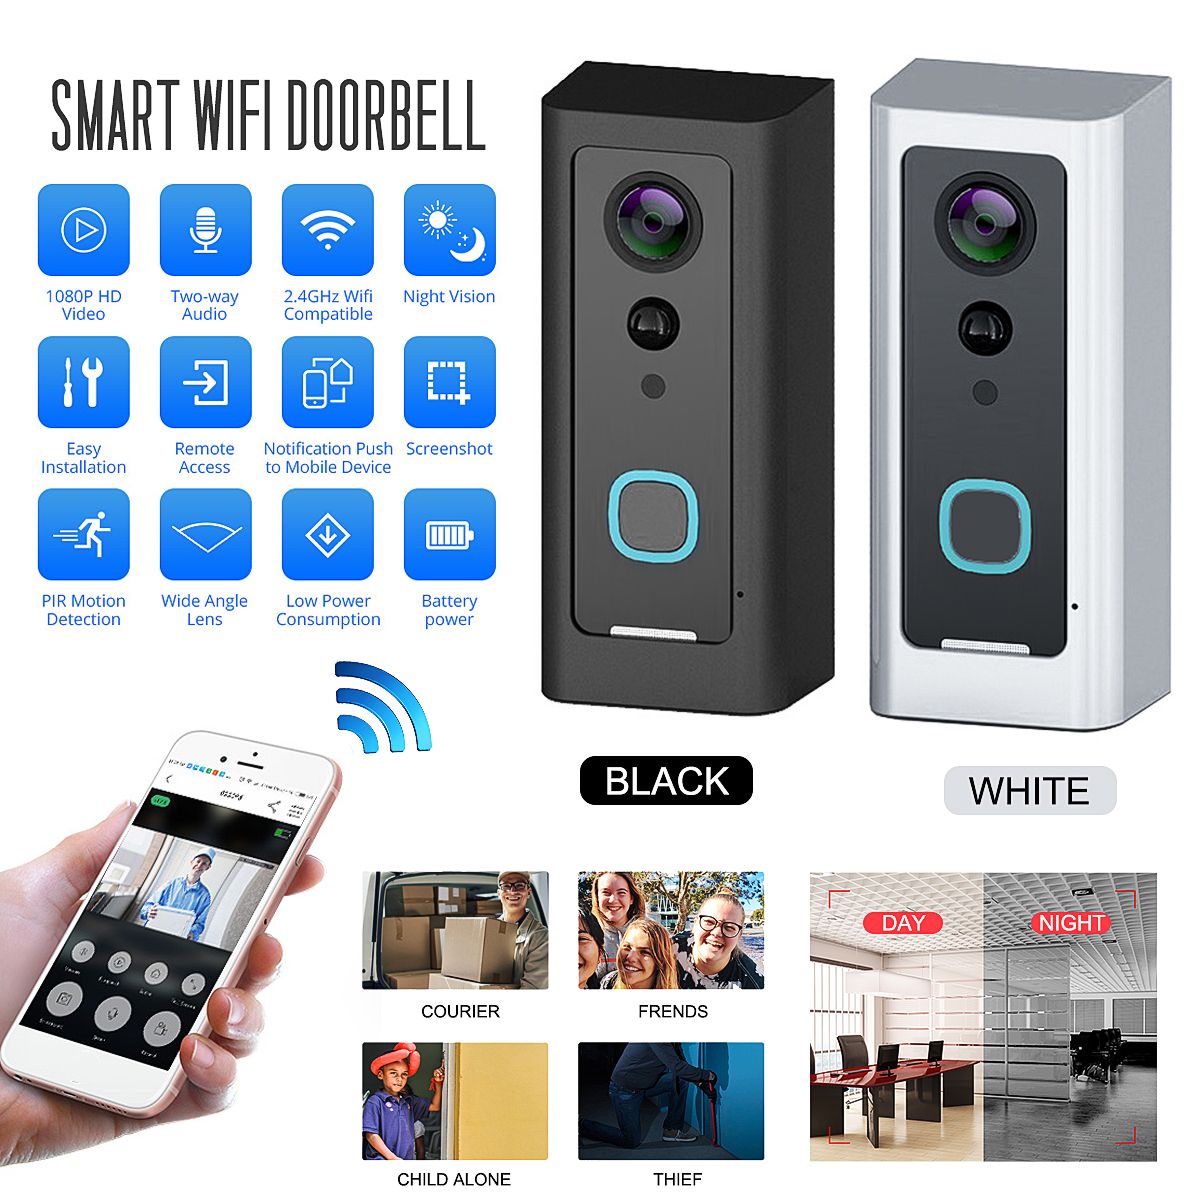 Smart-WiFi-Doorbell-Camera-Video-Wireless-Remote-Door-Bell-CCTV-Chime-Phone-Remote-Video-Monitoring--1587161